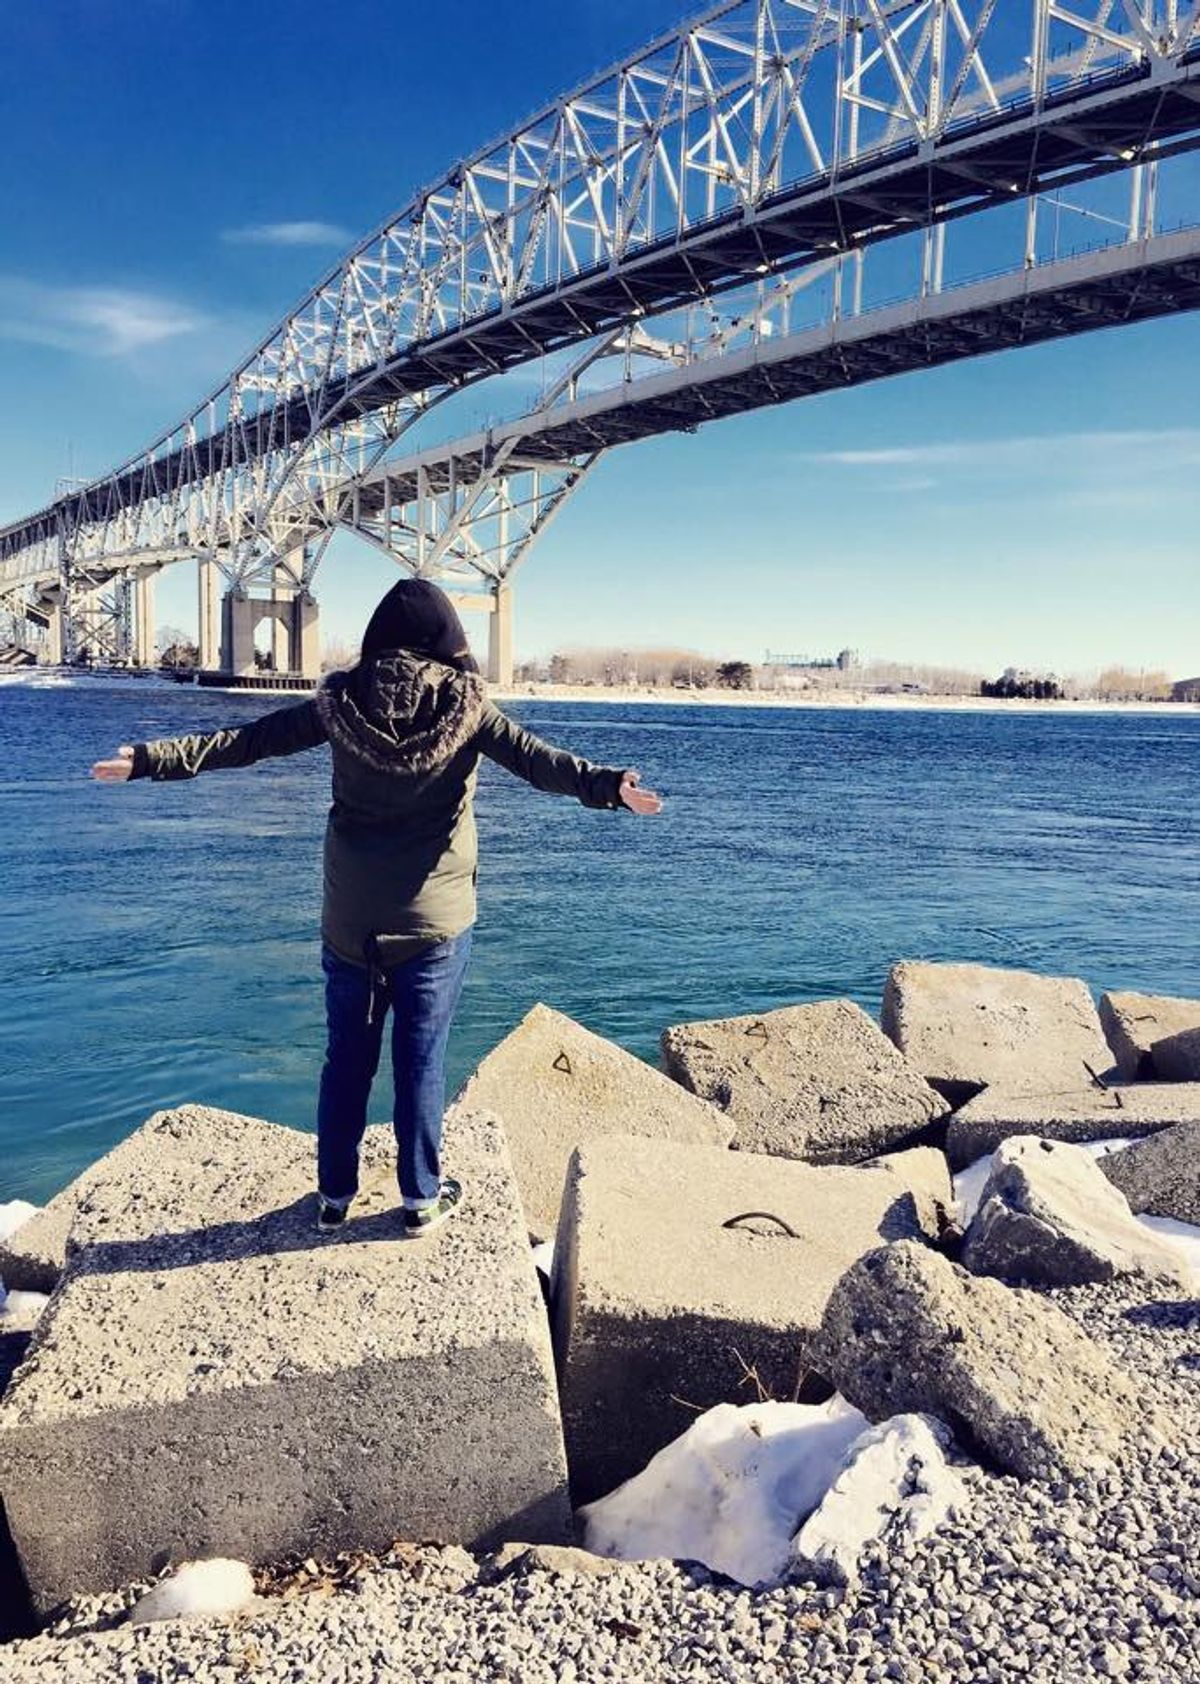 An Open Letter To My Hometown, Port Huron